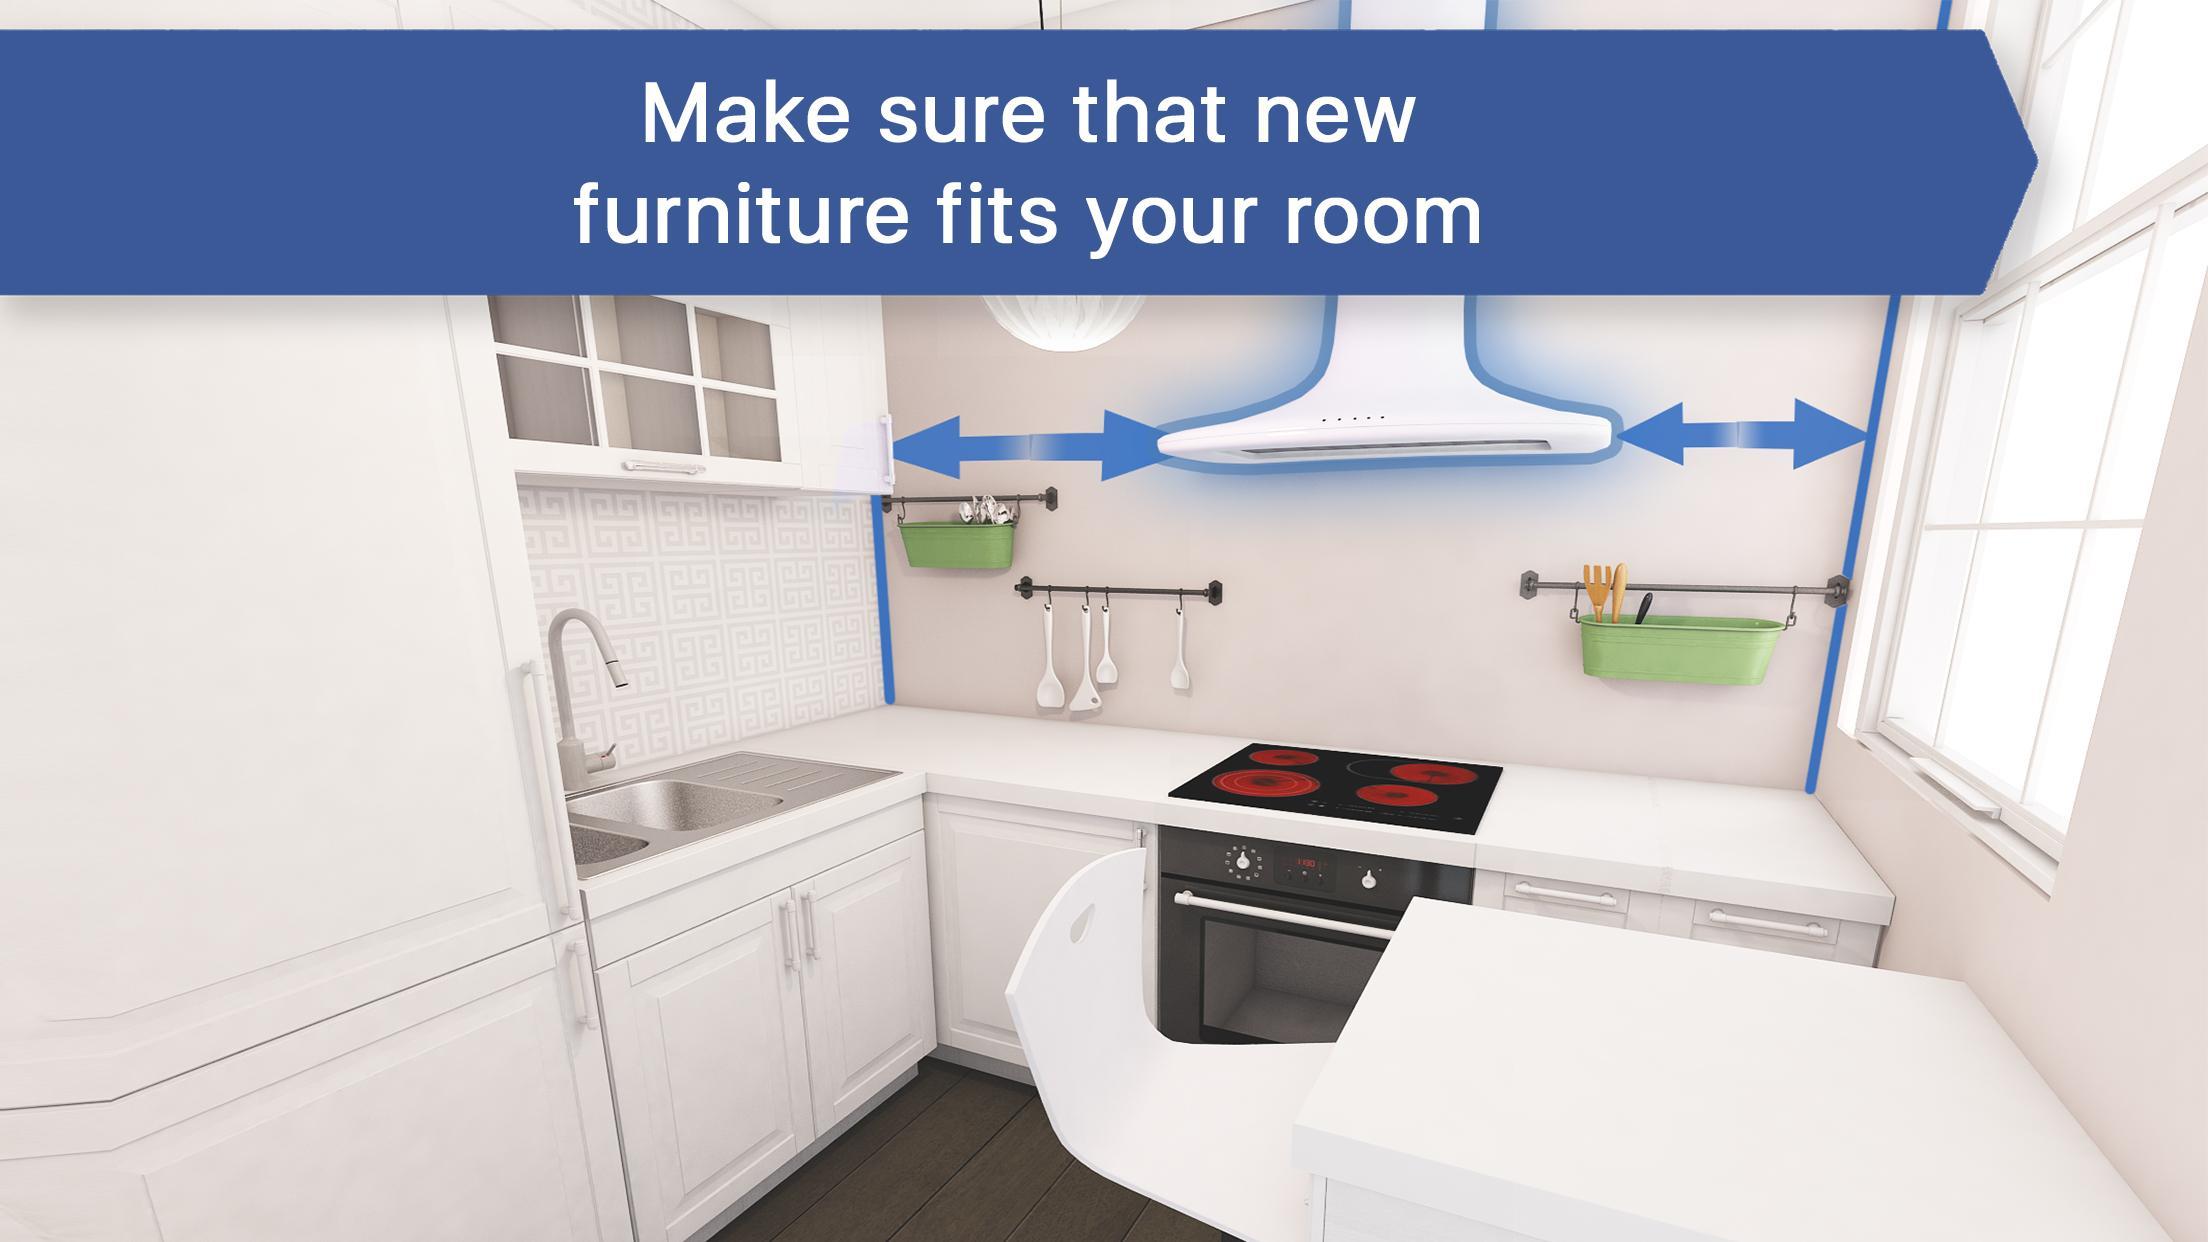 3D Kitchen Design for IKEA: Room Interior Planner for Android - APK